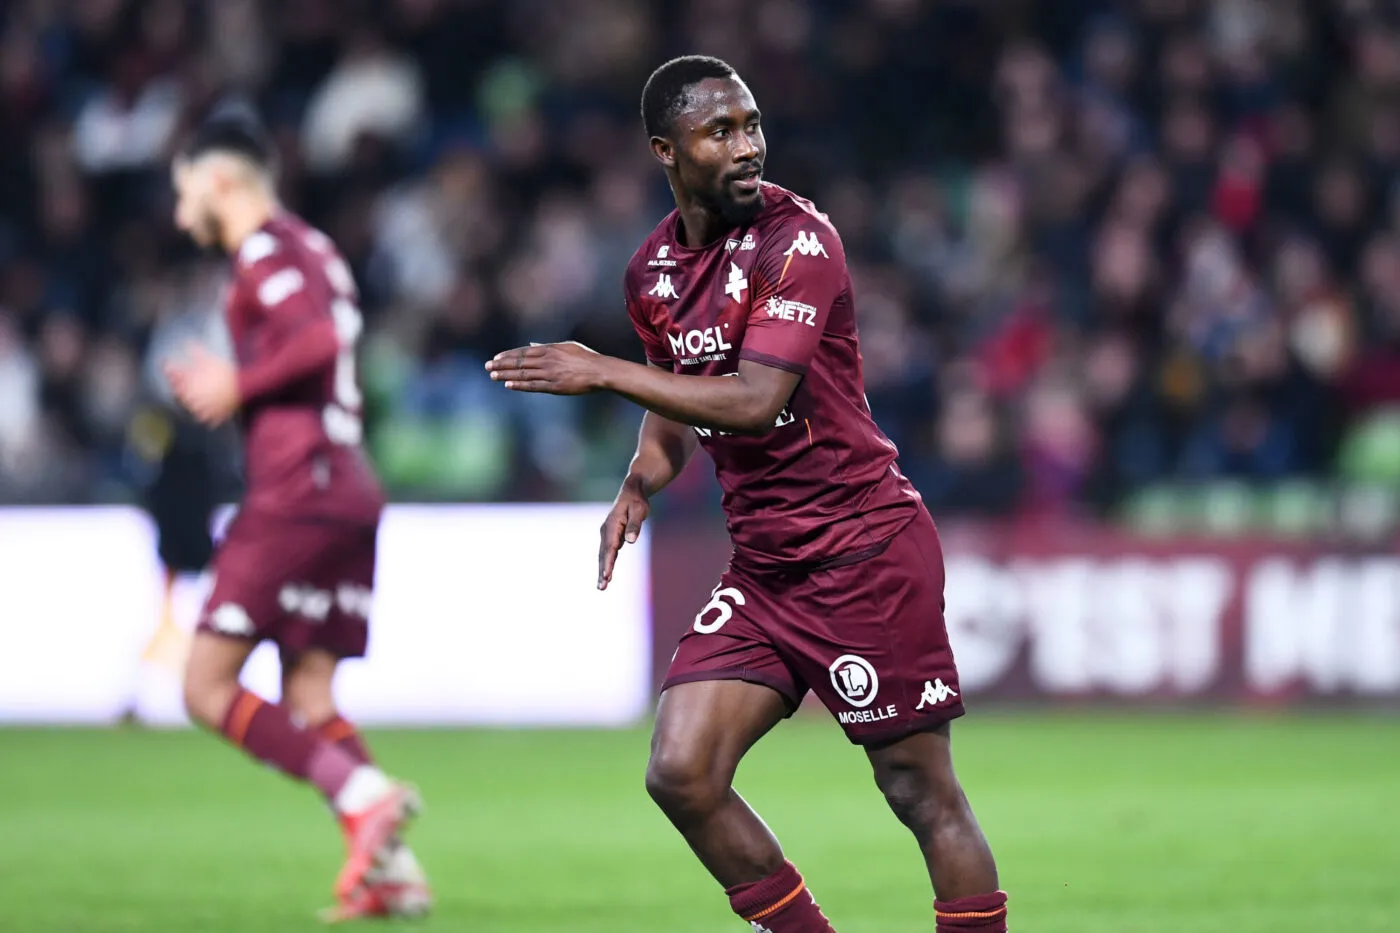 36 Ablie JALLOW (fcm) during the Ligue 2 BKT match between Football Club de Metz and Quevilly Rouen Metropole at Stade Saint-Symphorien on January 13, 2023 in Metz, France. (Photo by Philippe Lecoeur/FEP/Icon Sport)